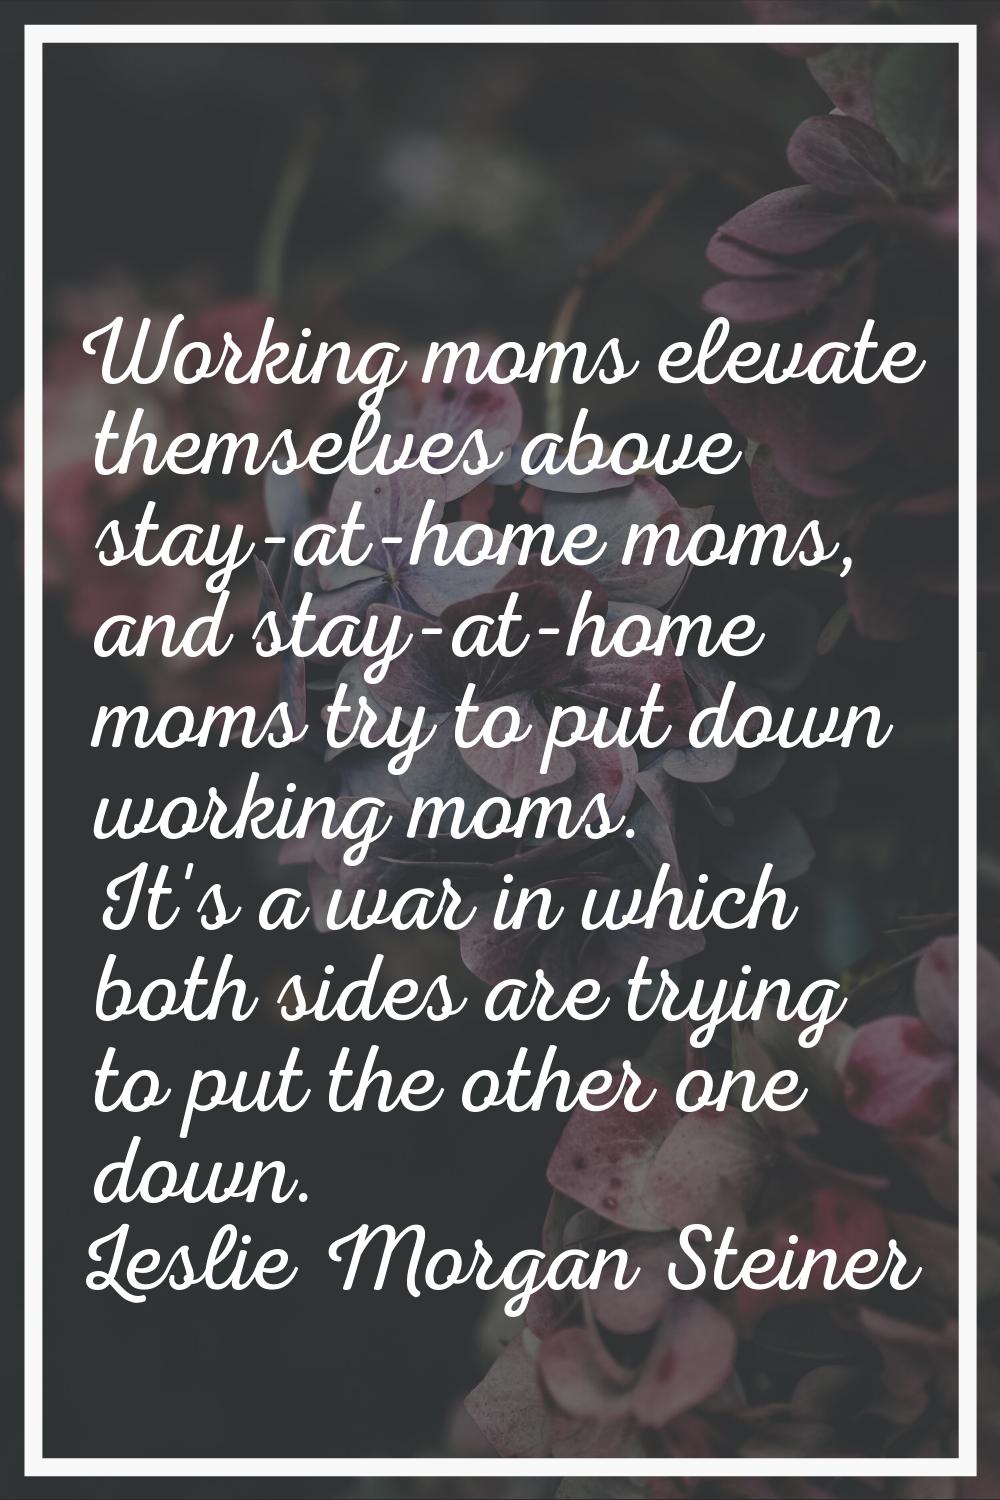 Working moms elevate themselves above stay-at-home moms, and stay-at-home moms try to put down work